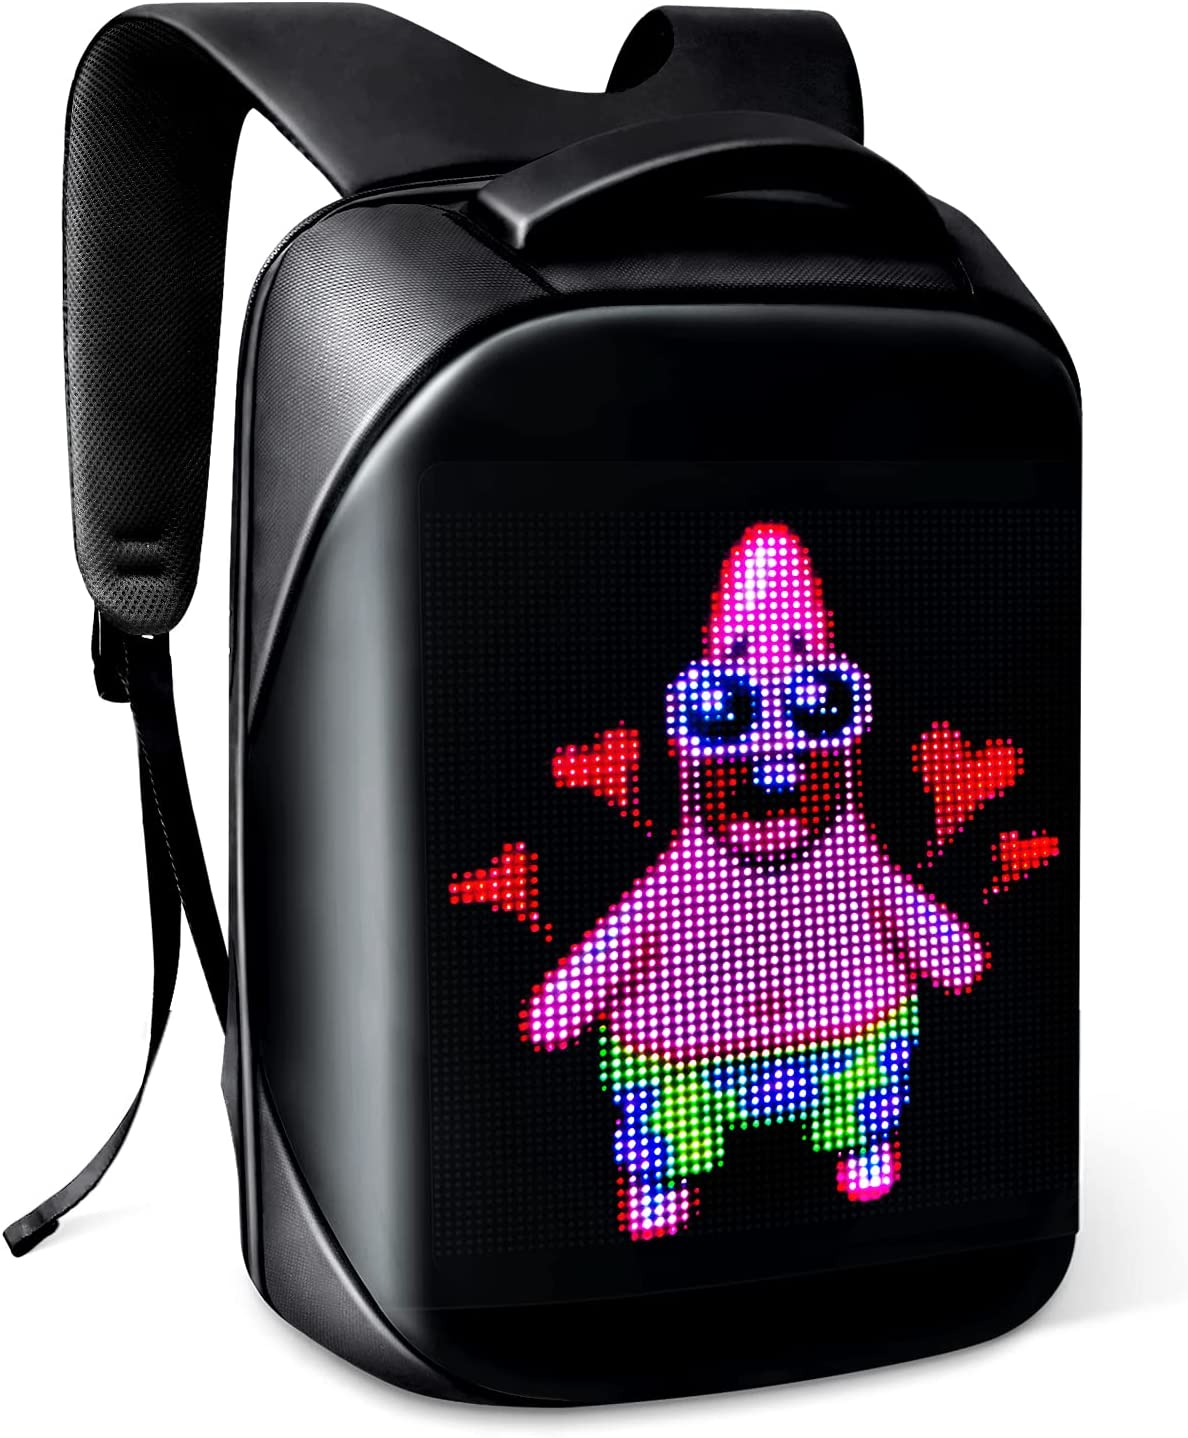 LED Smart Backpack With Display Electronic Subtitles Advertising Luminous  Backpack [LED-BACKPACK] - $83.99 :